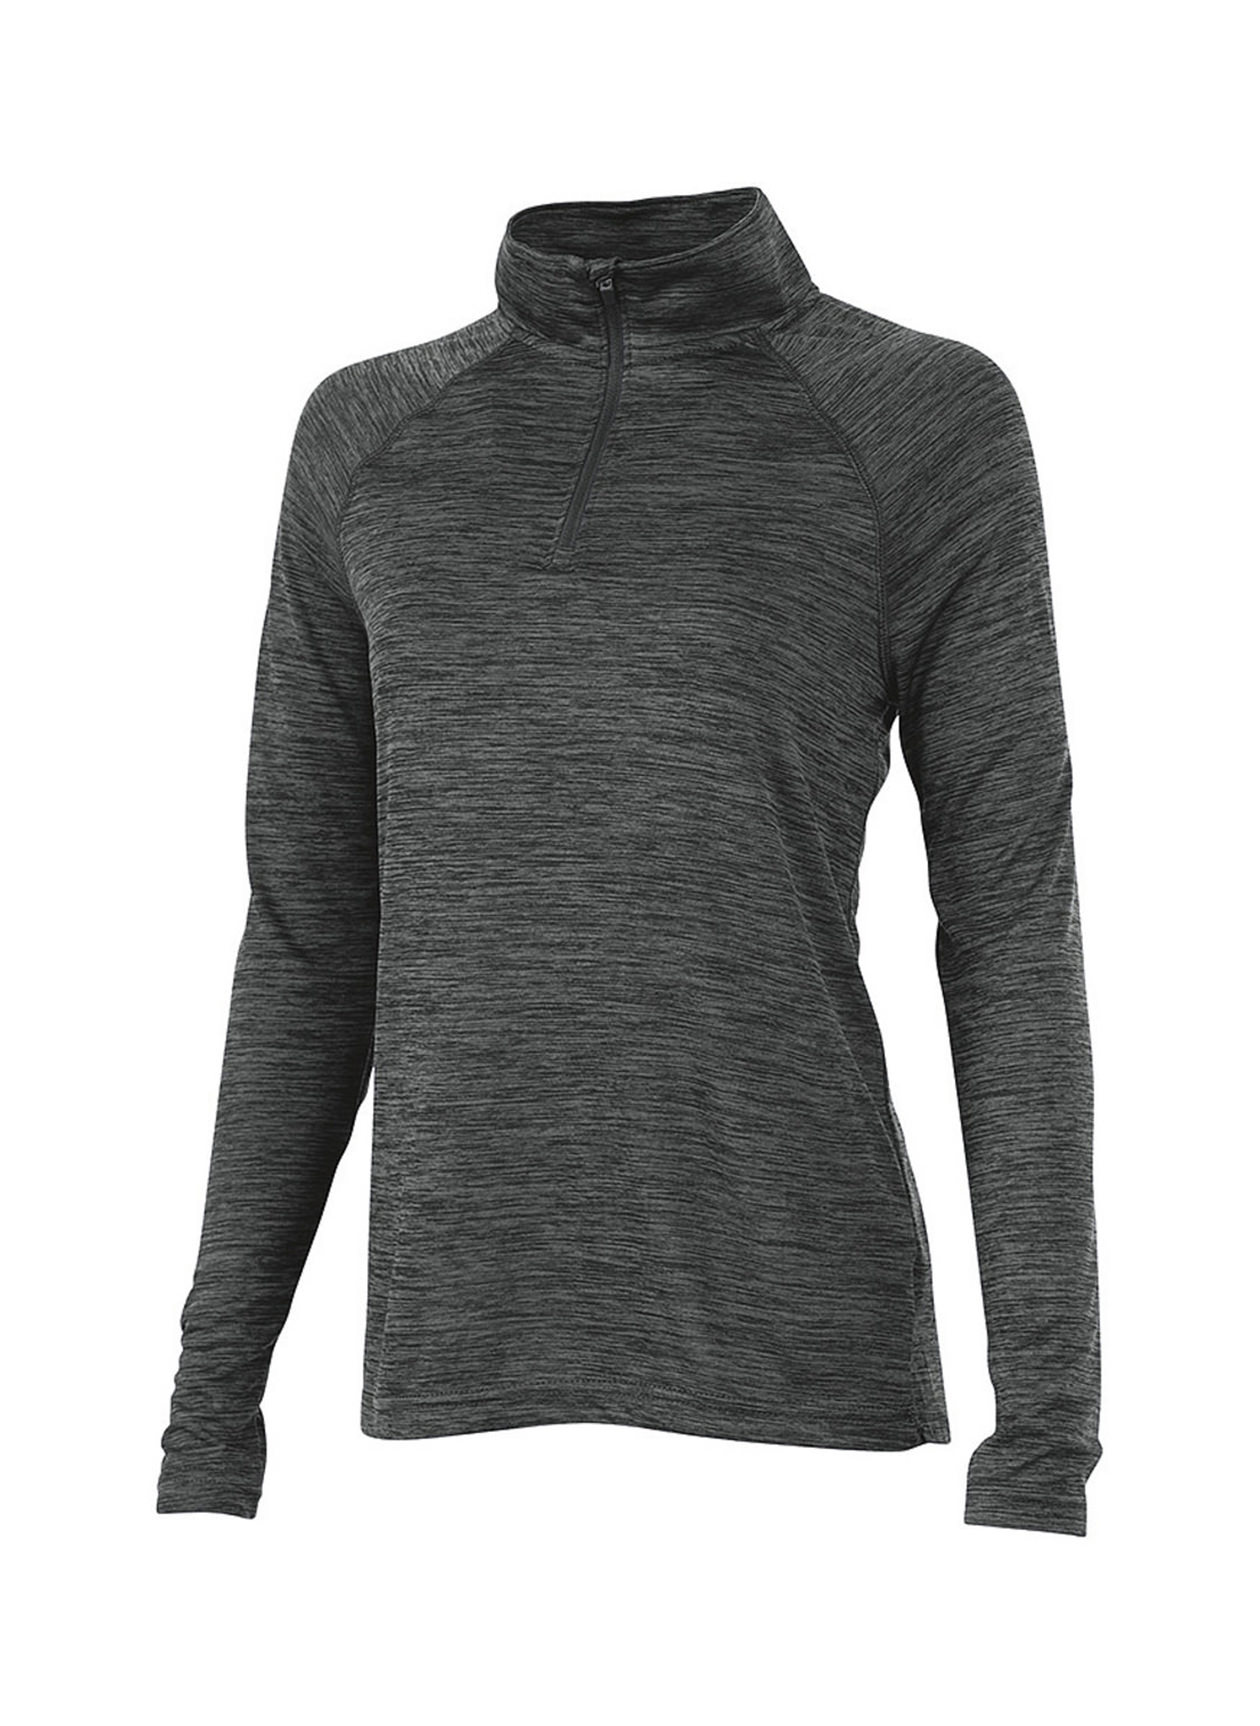 Charles River Women's Black Space Dyed Quarter-Zip